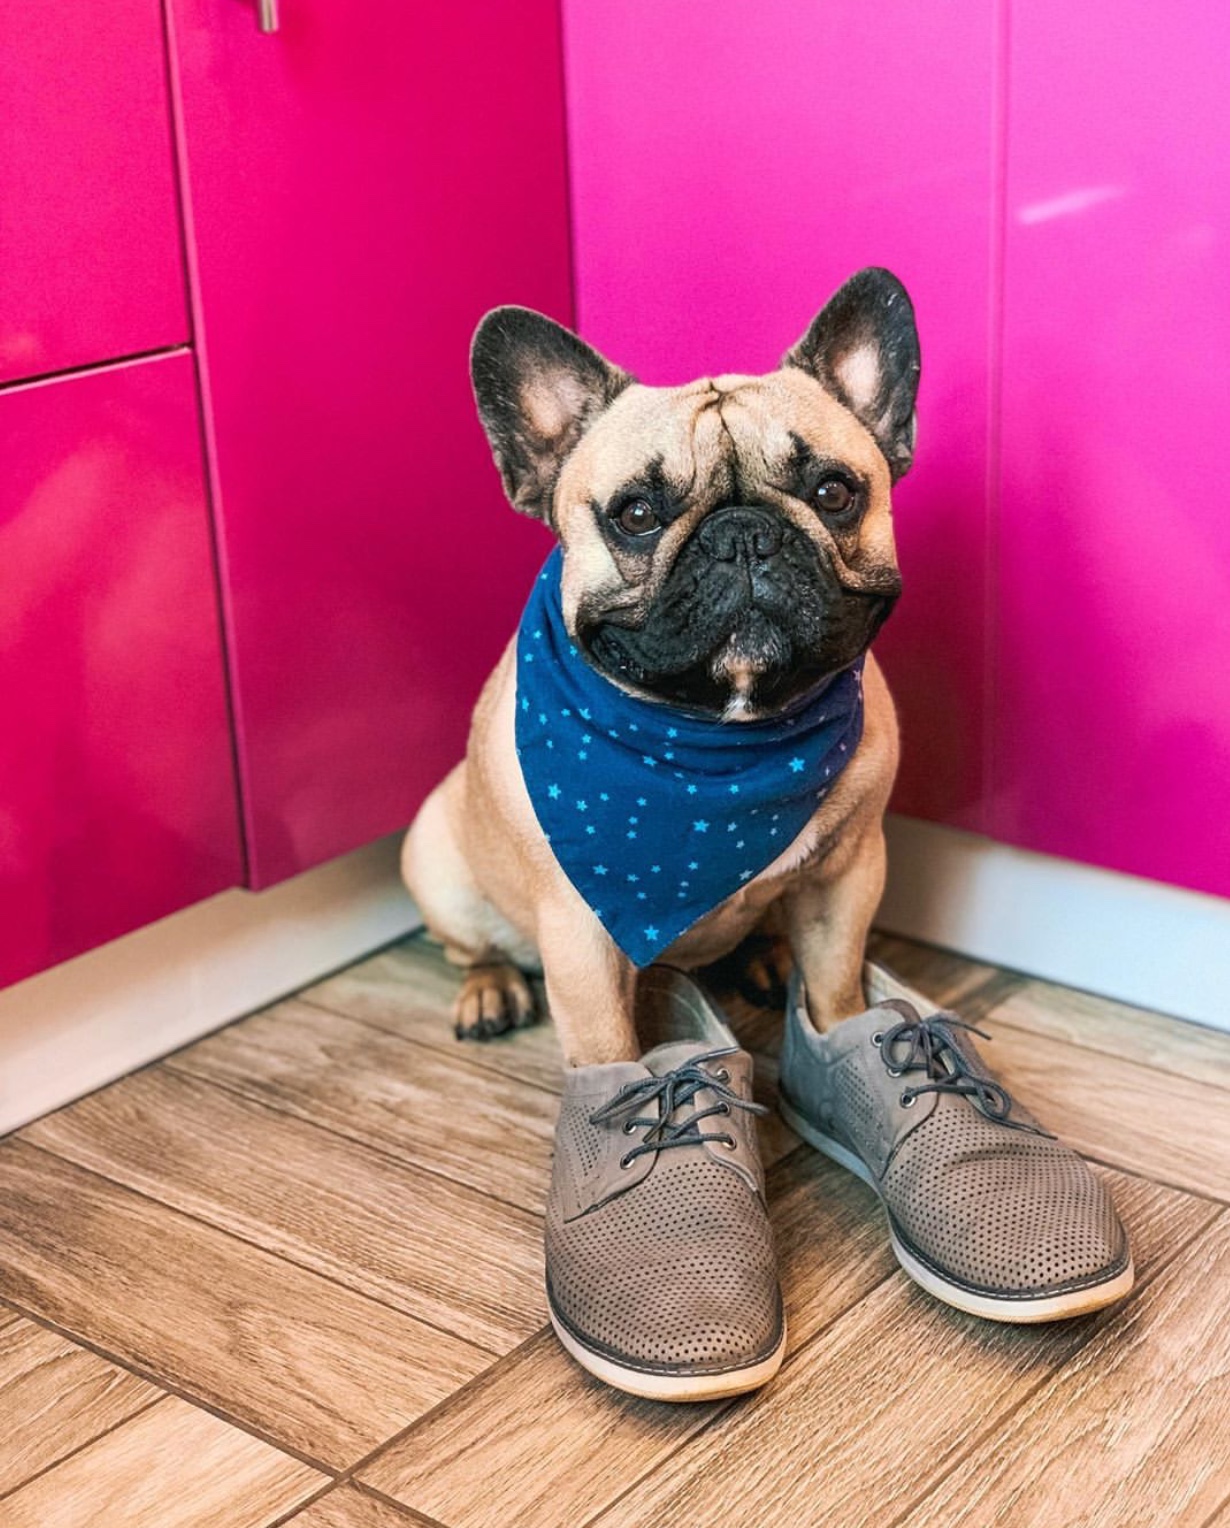 A French Bulldog wearing a blue scarf while sitting in the corner wearing shoes on his front legs